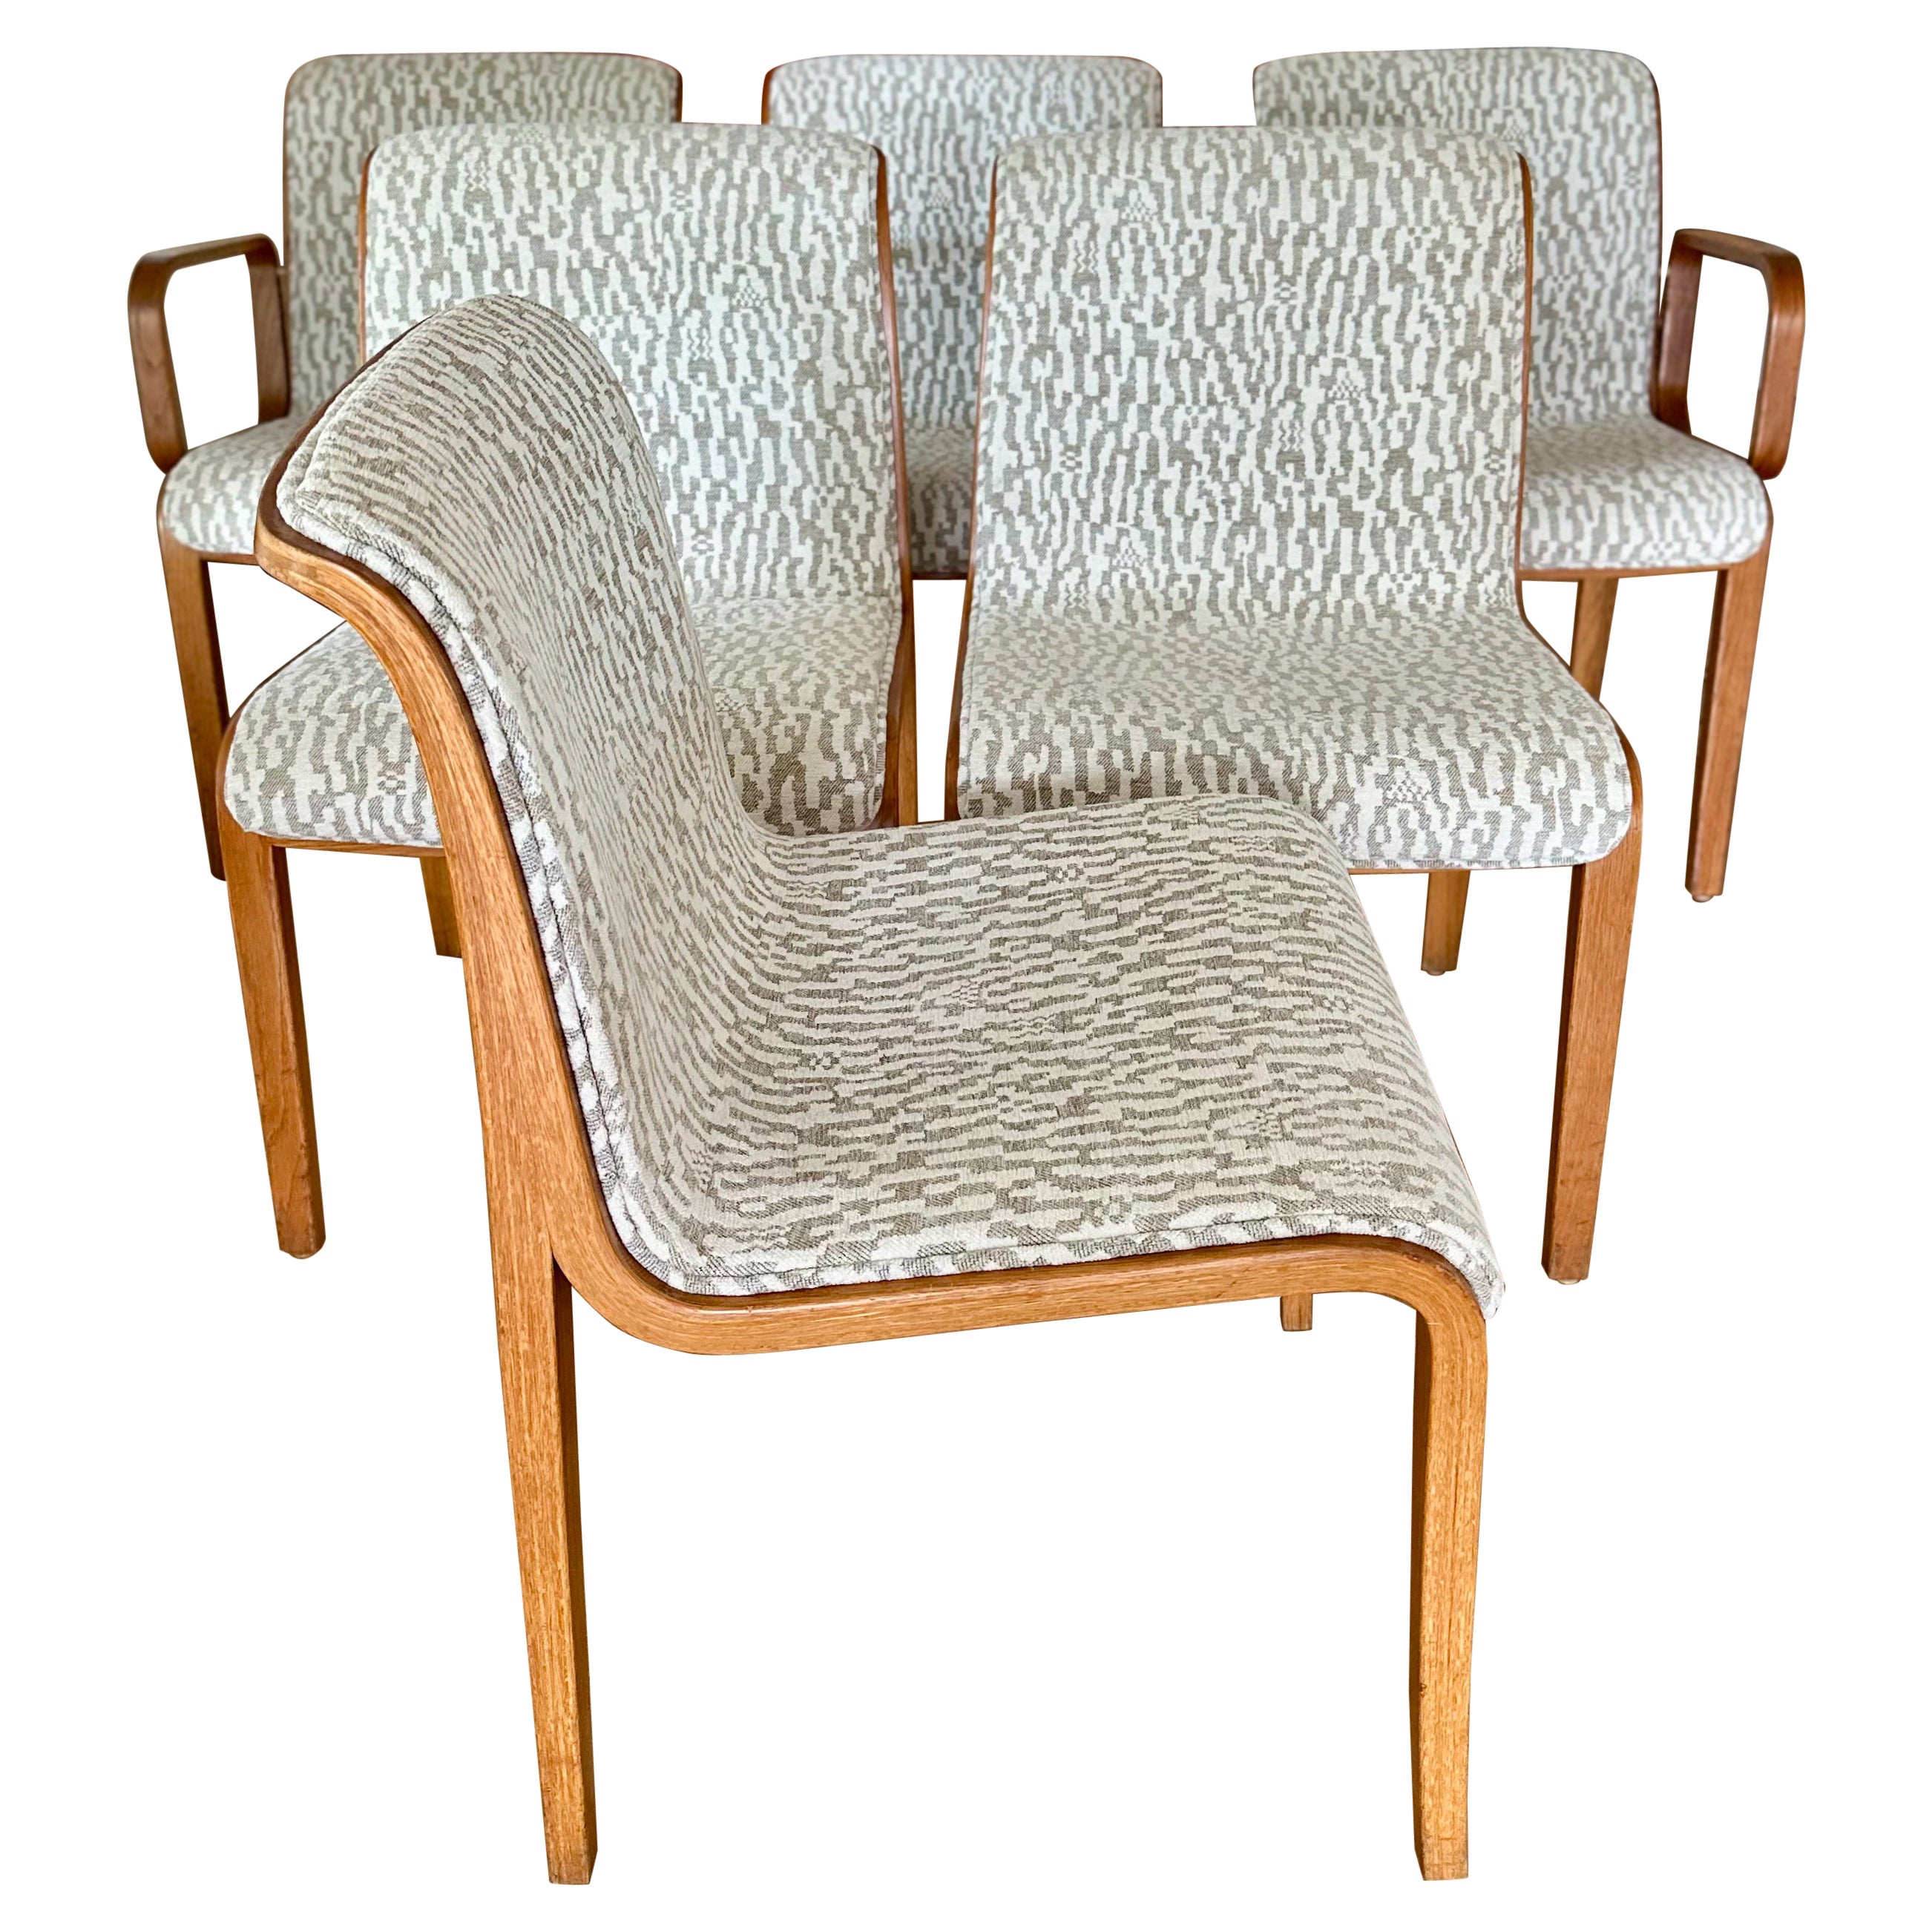 1976 Bill Stephens for Knoll Dining Chairs - Set of 6